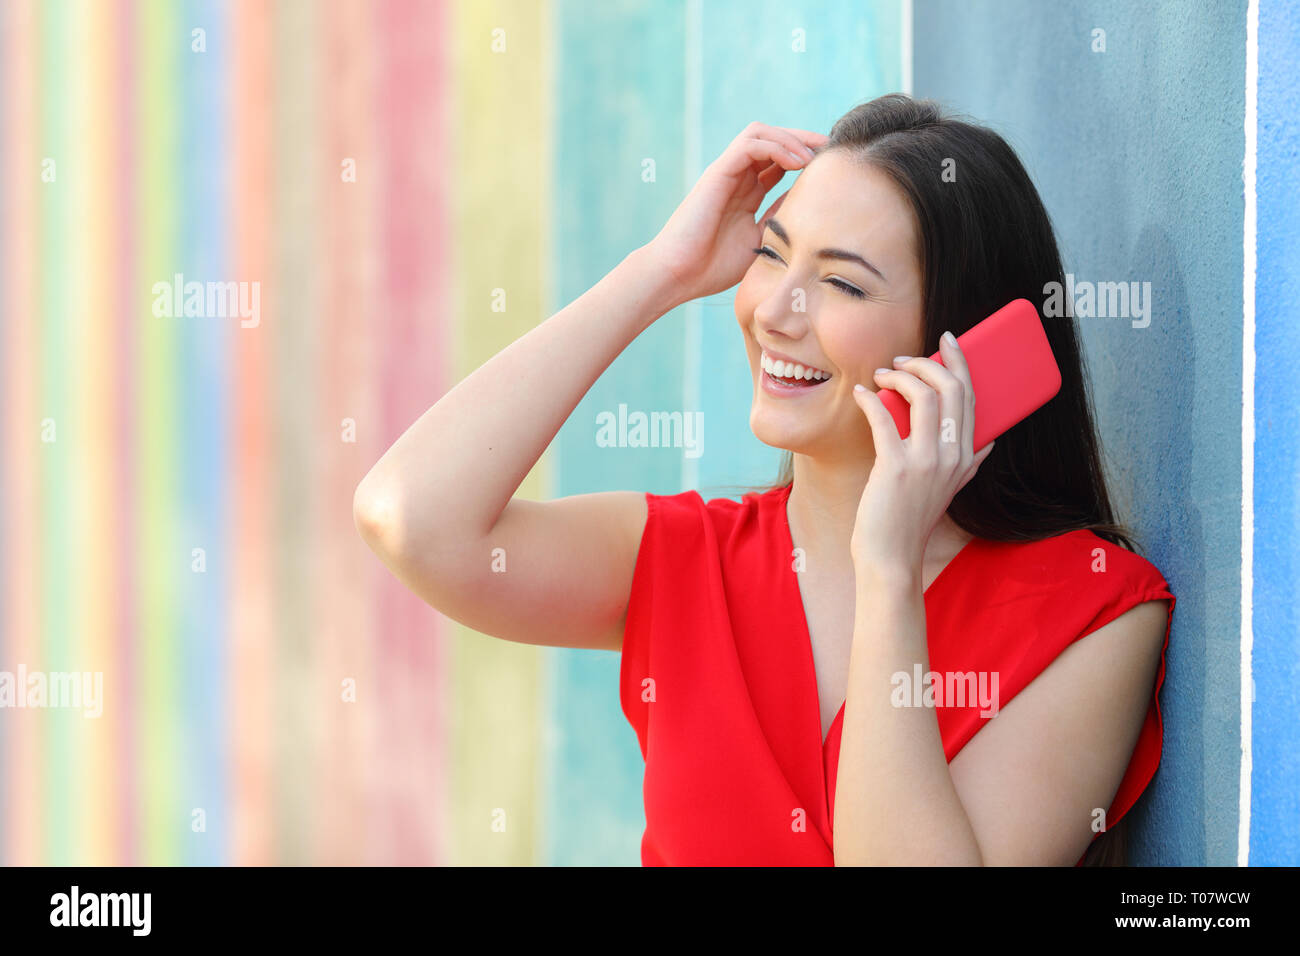 Candid fashion woman in red talking on smart phone in a colorful street Stock Photo